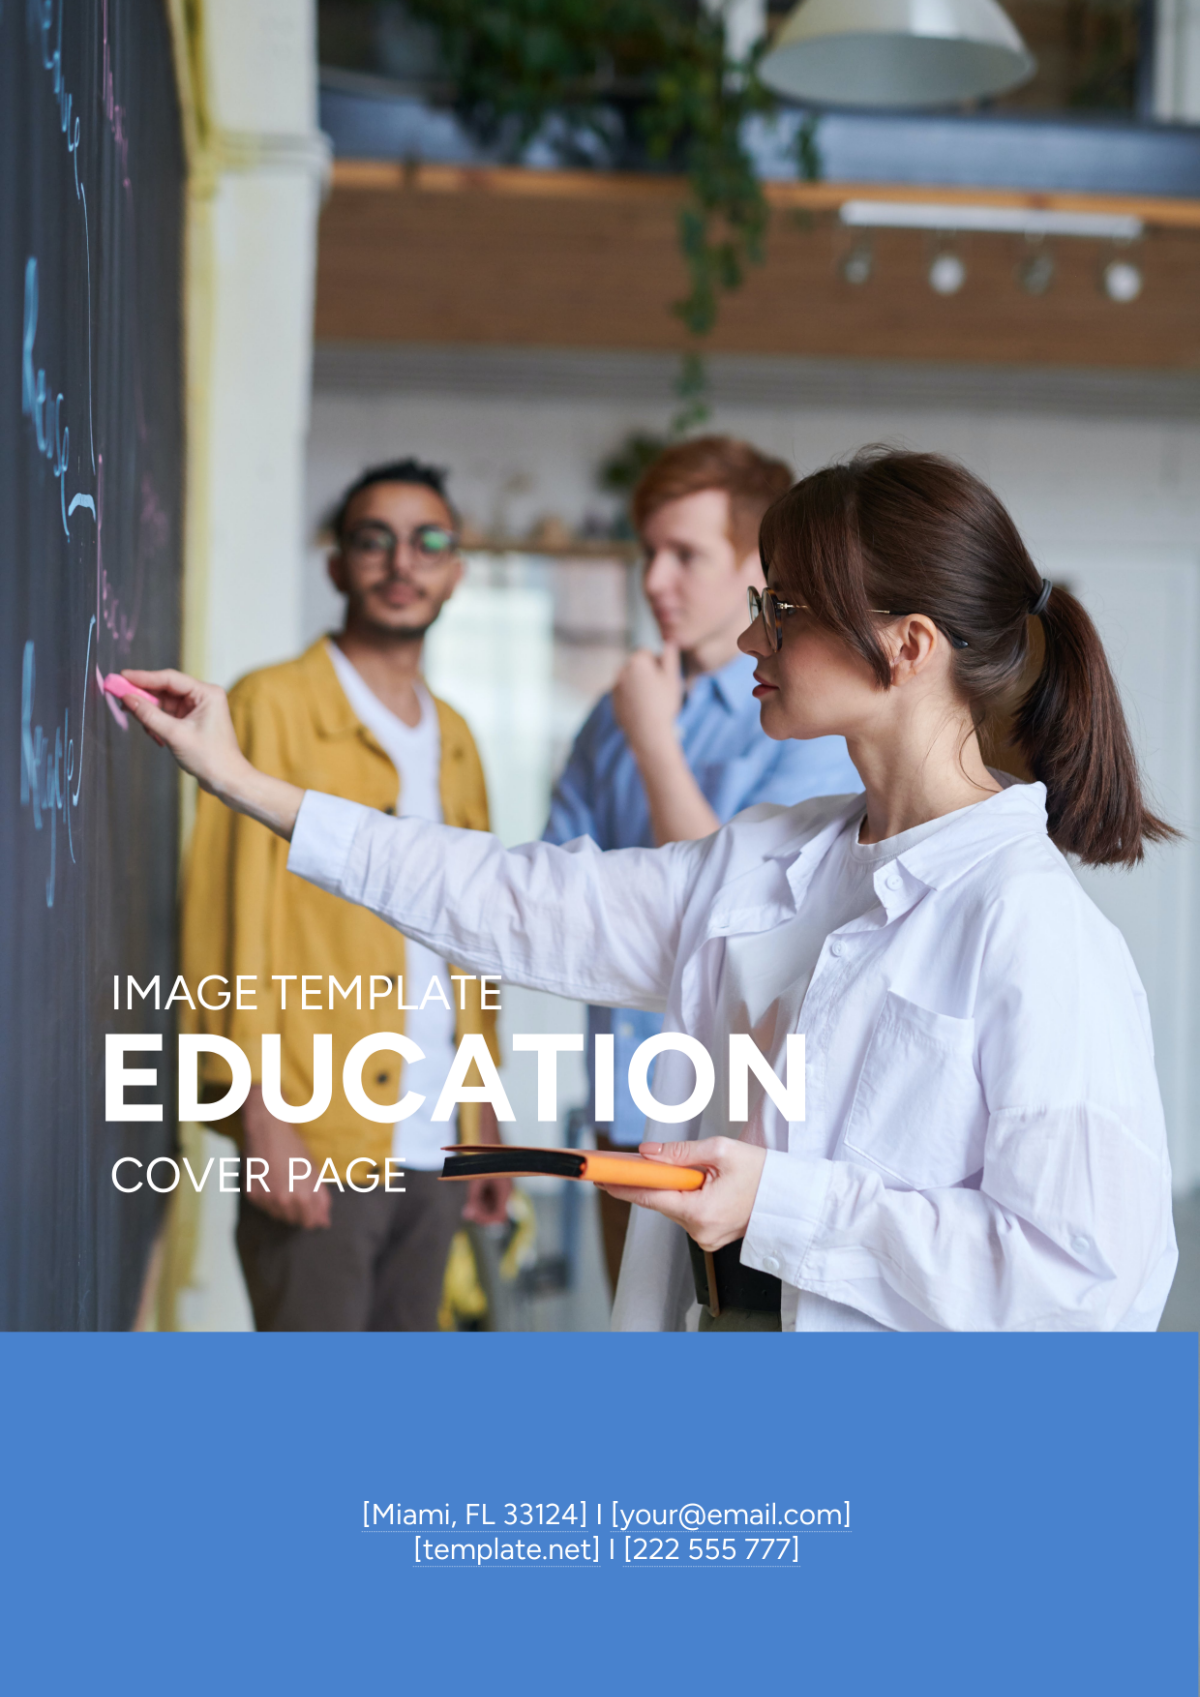 Education Cover Page Image Template